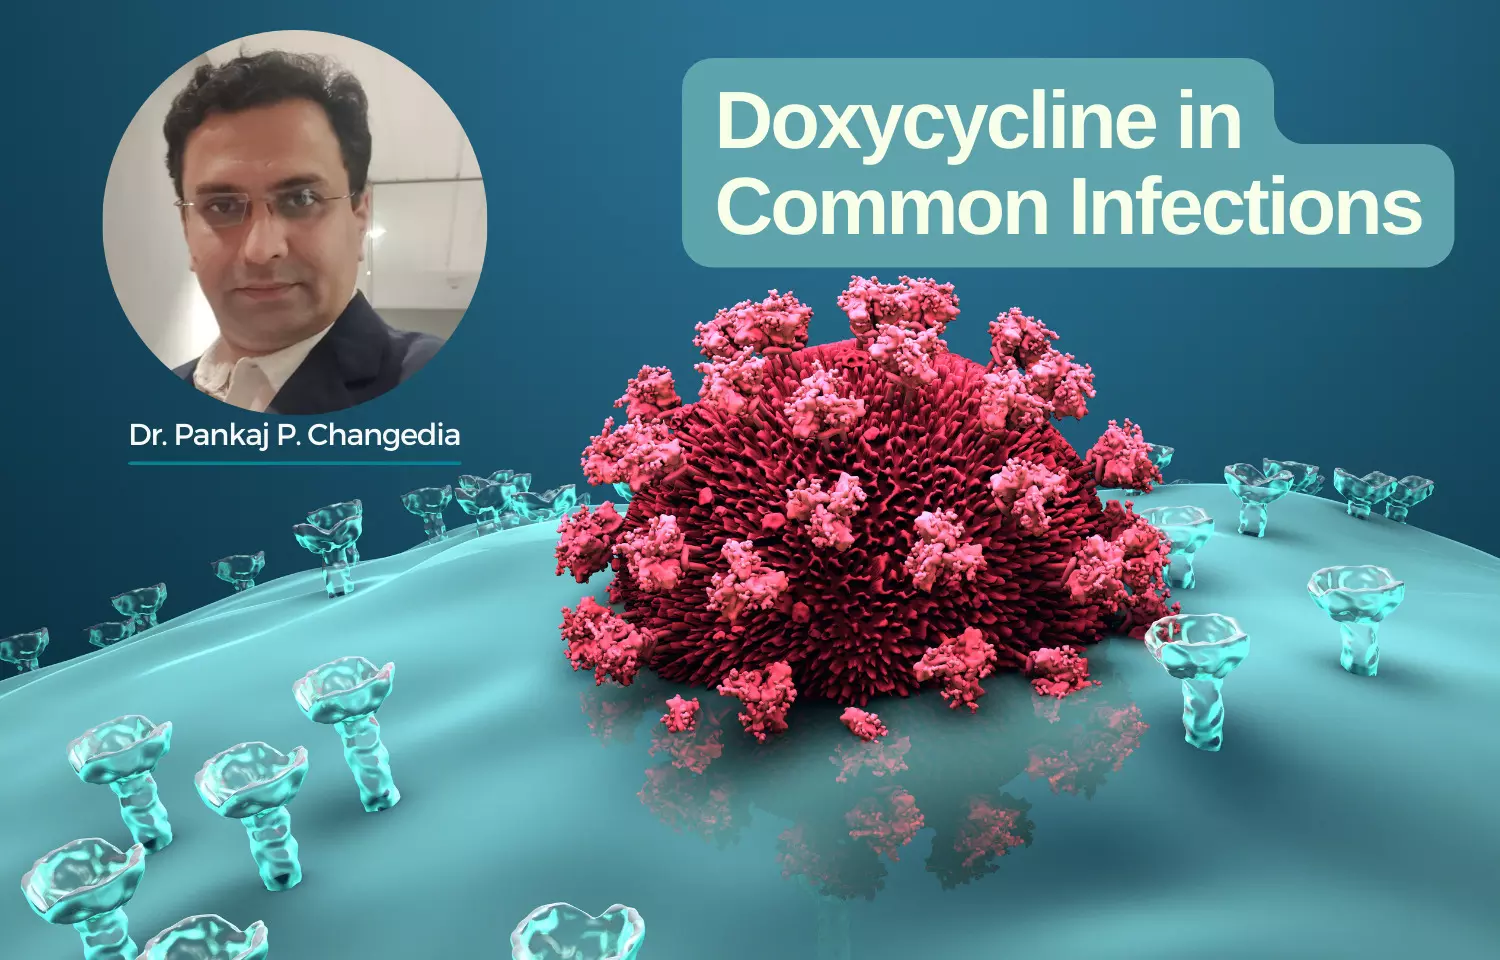 Choice of Antibiotics in Common Infections: Doxycycline or Azithromycin?